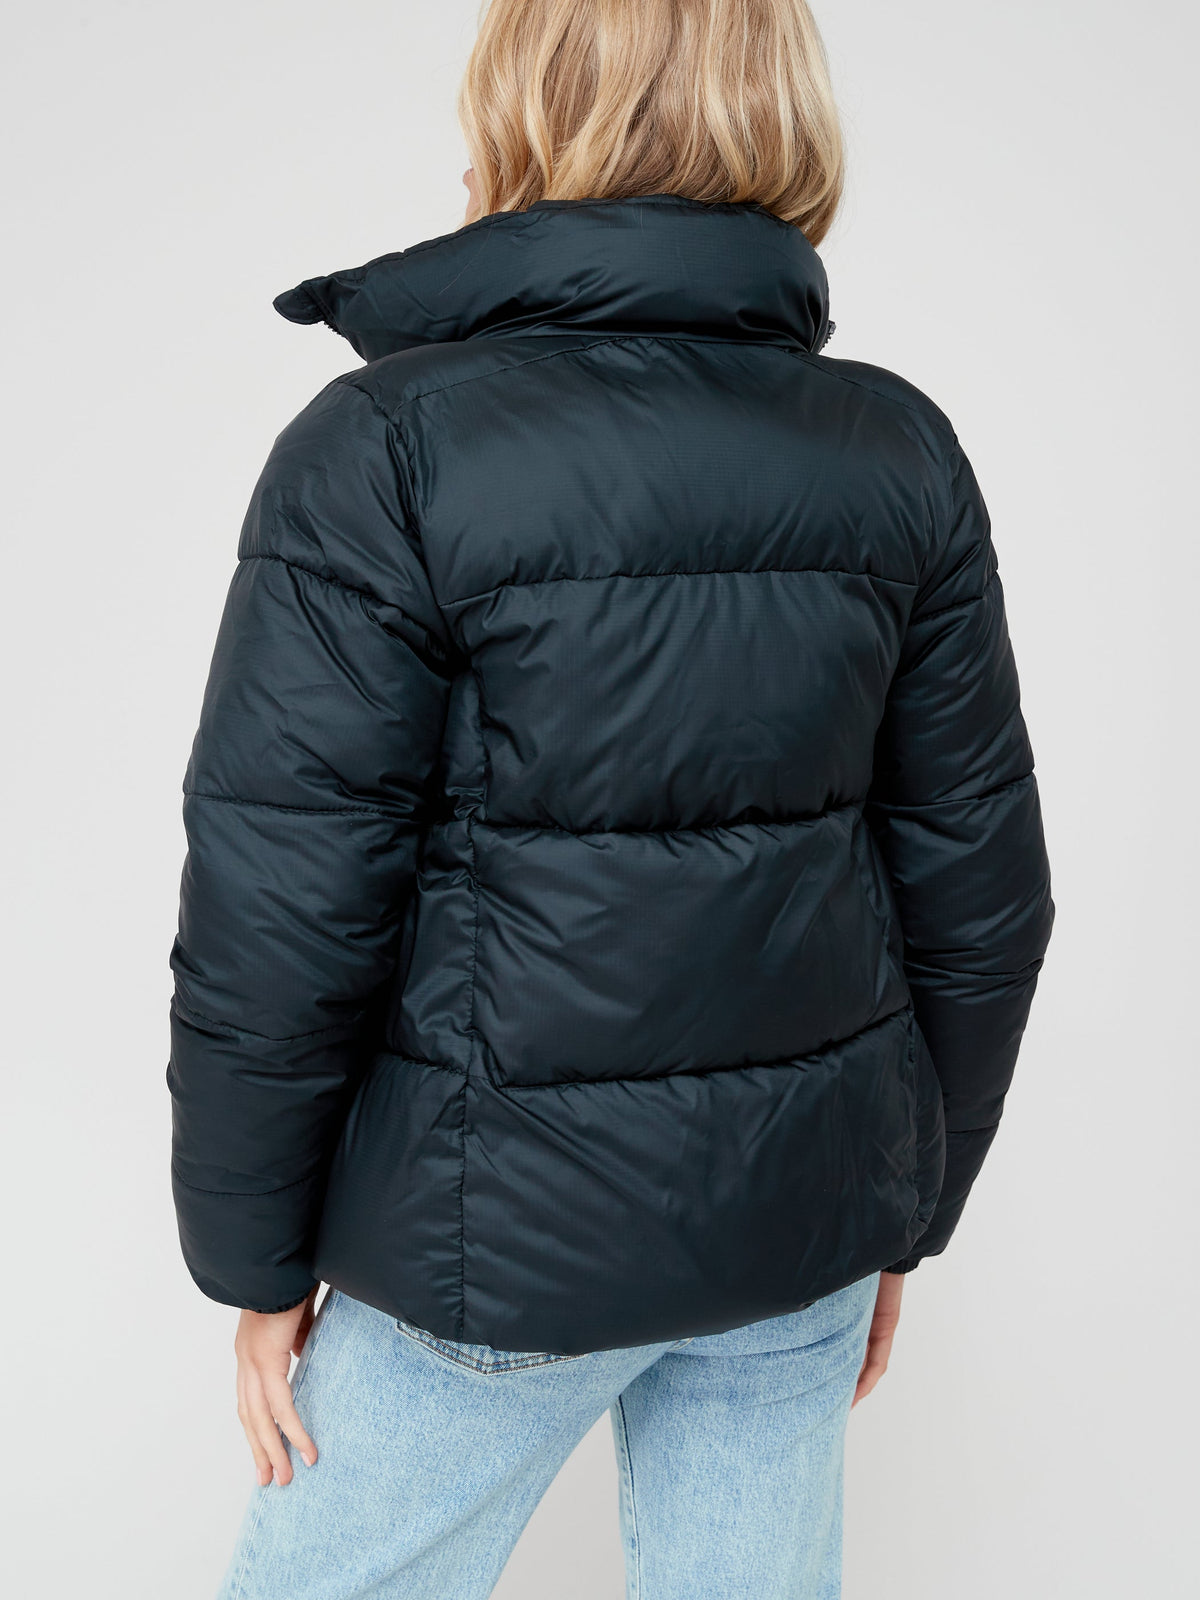 Womens Columbia Puffect Jacket in Black